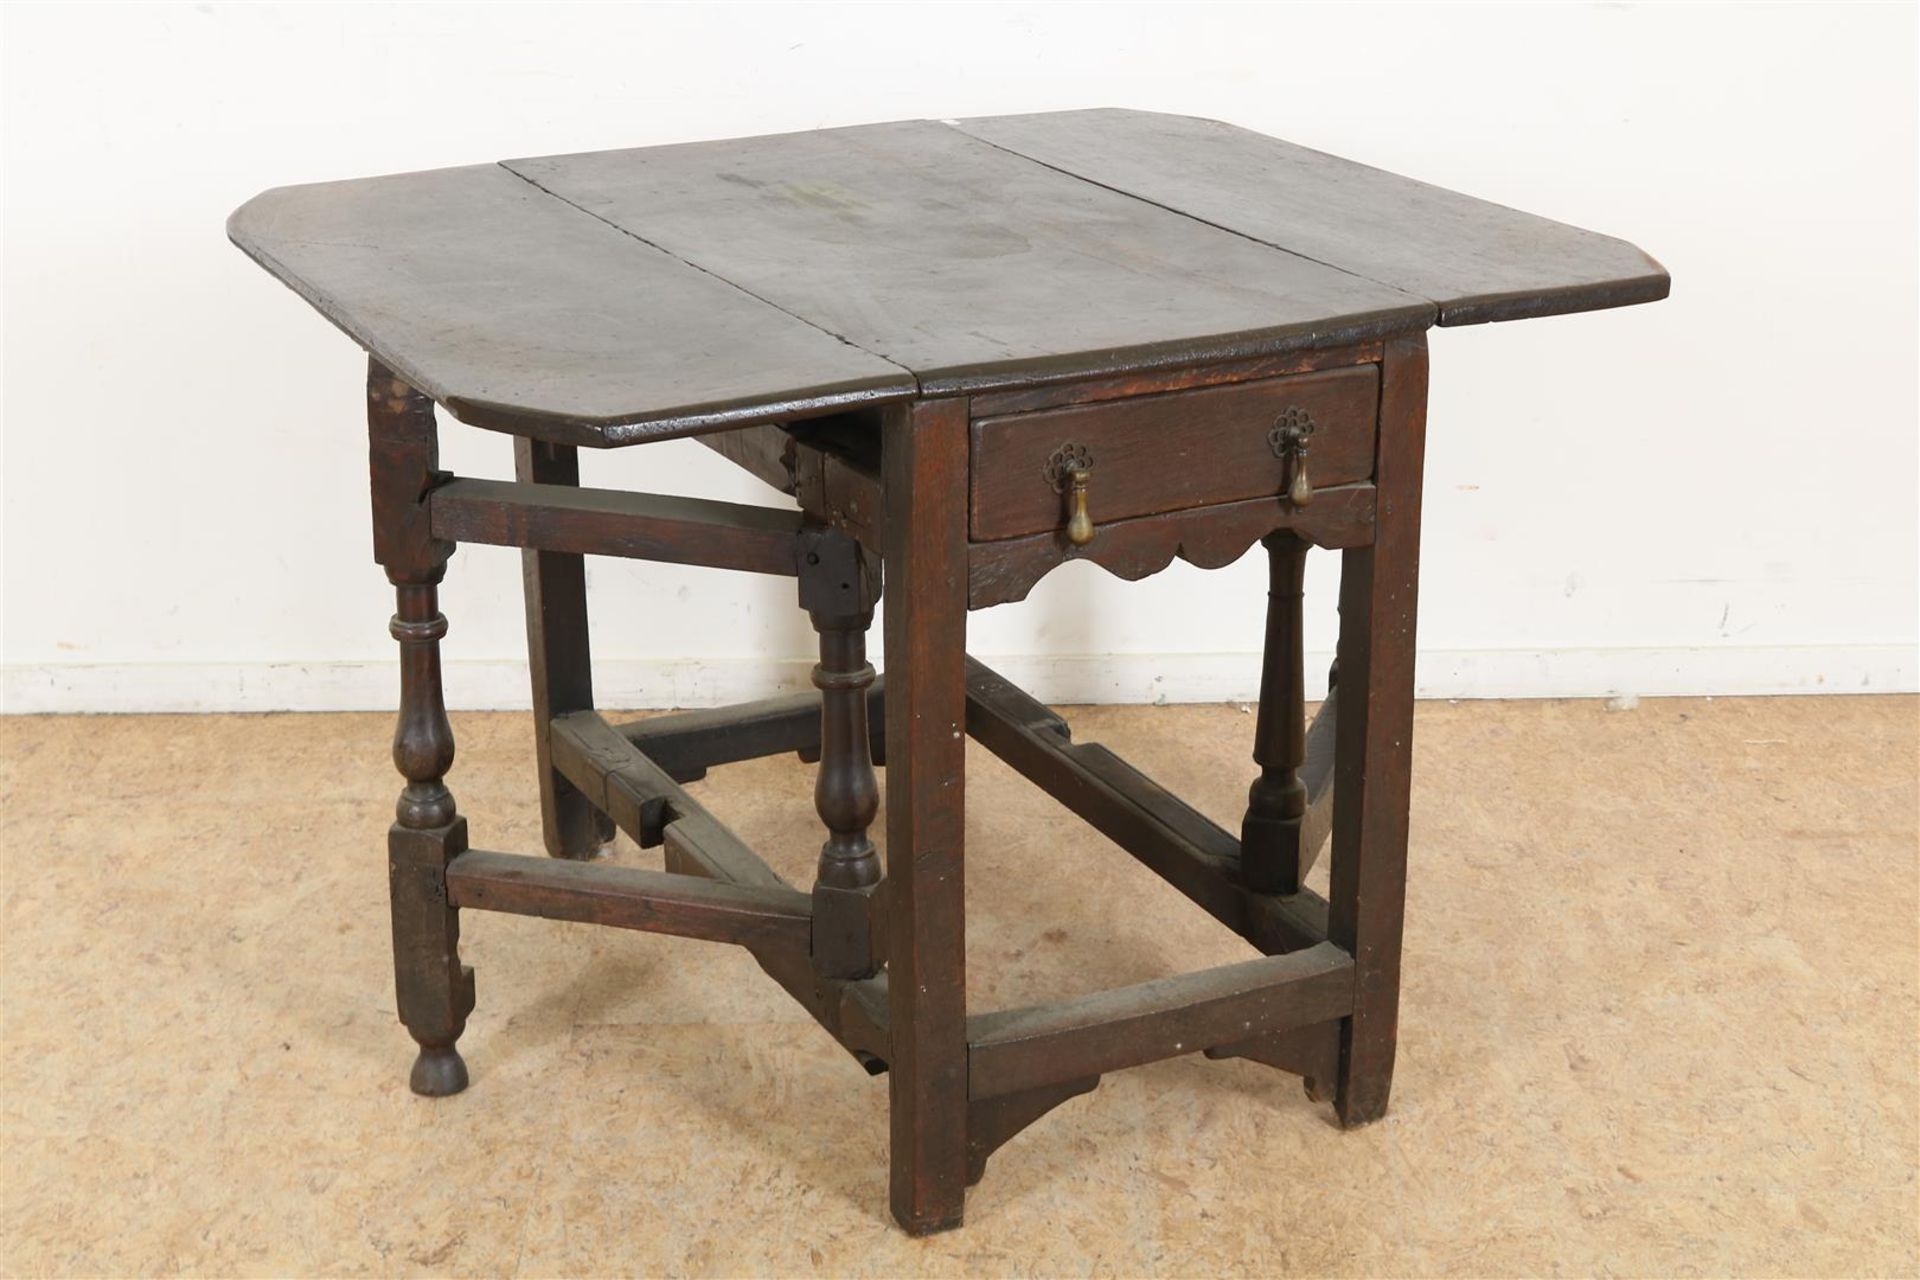 Oak Georgian gateleg table with 2 side leaves and 2 side drawers, England early 18th century, h. 70,